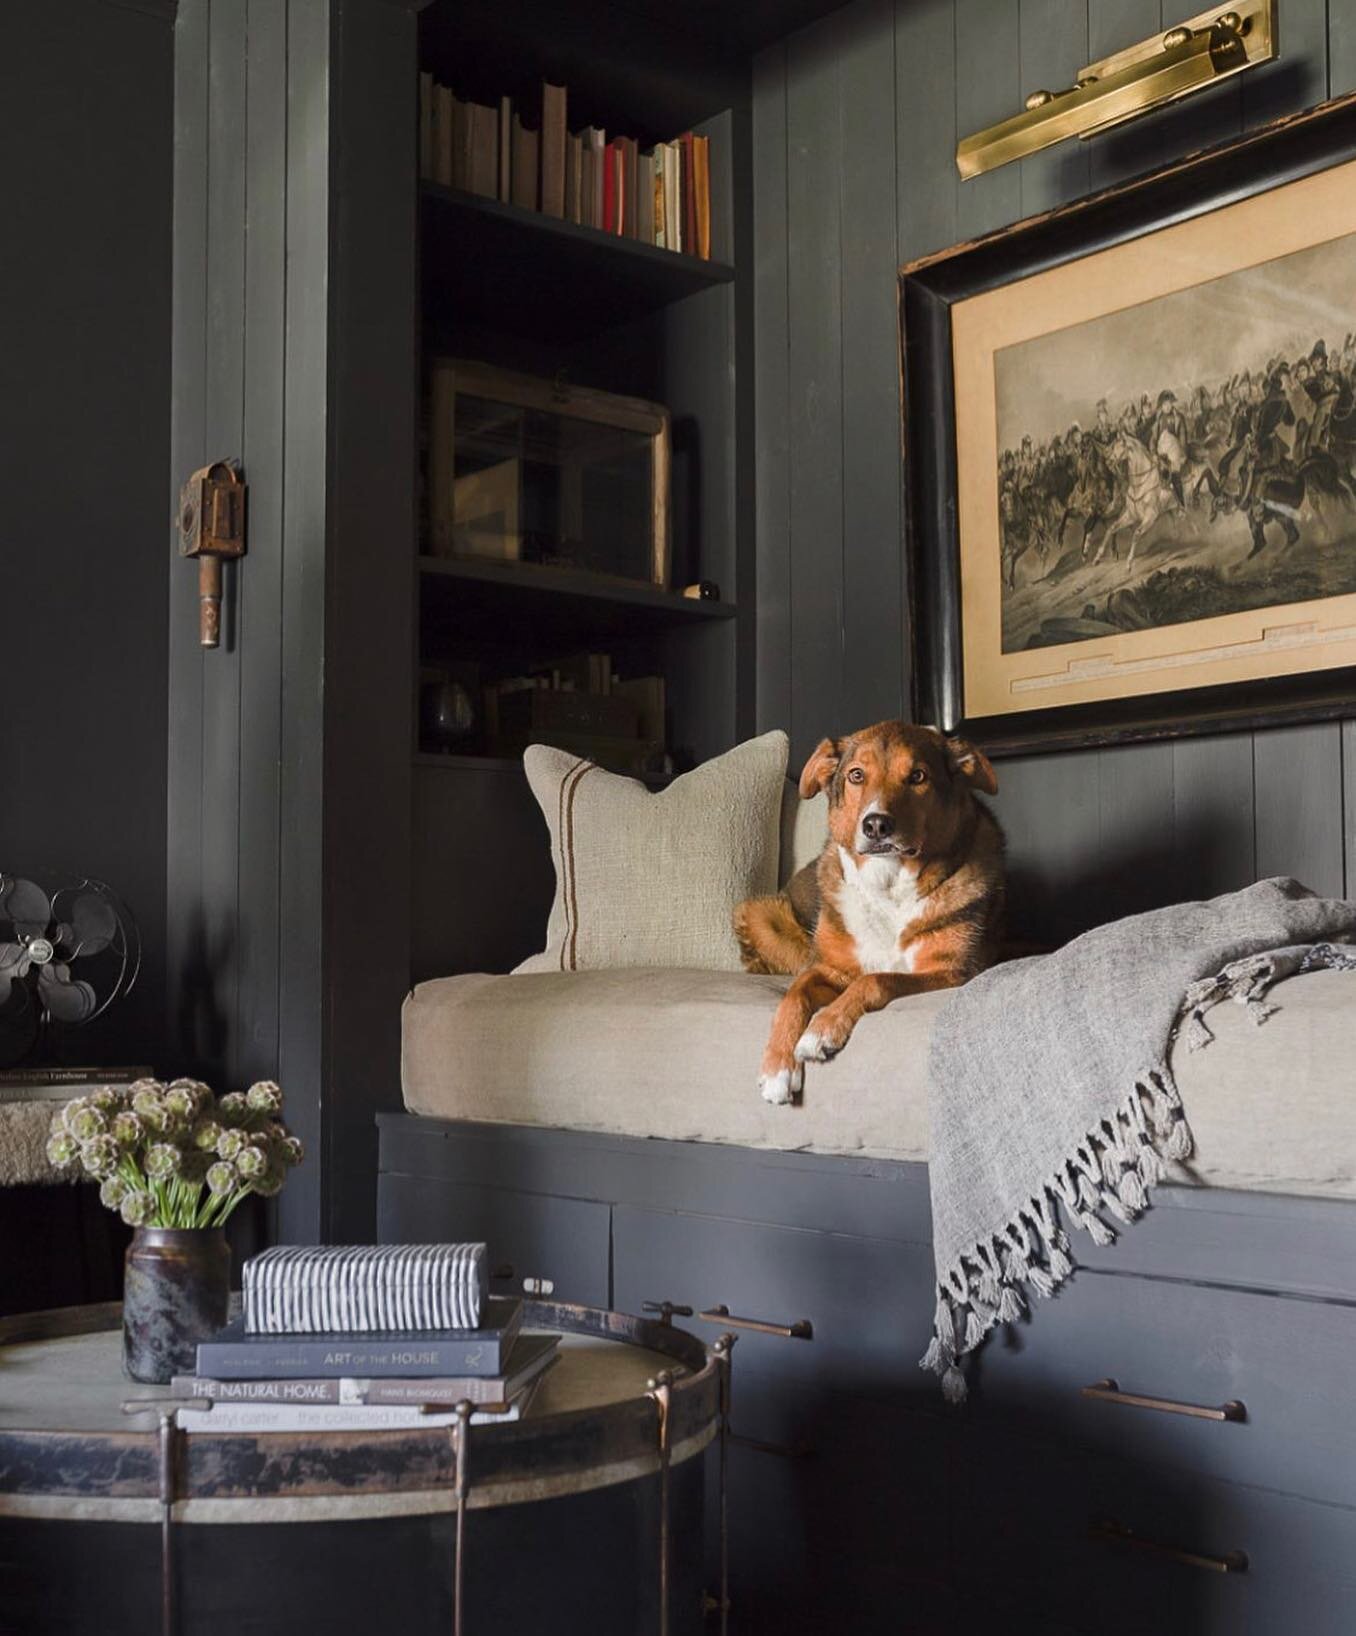 All about this #moody vibe @seanandersondesign has going on in this cozy nook. Give me a beautiful design book and that adorable pup and I&rsquo;ll be here the rest of the afternoon. 
.
.
📸 @alyssarosenheck